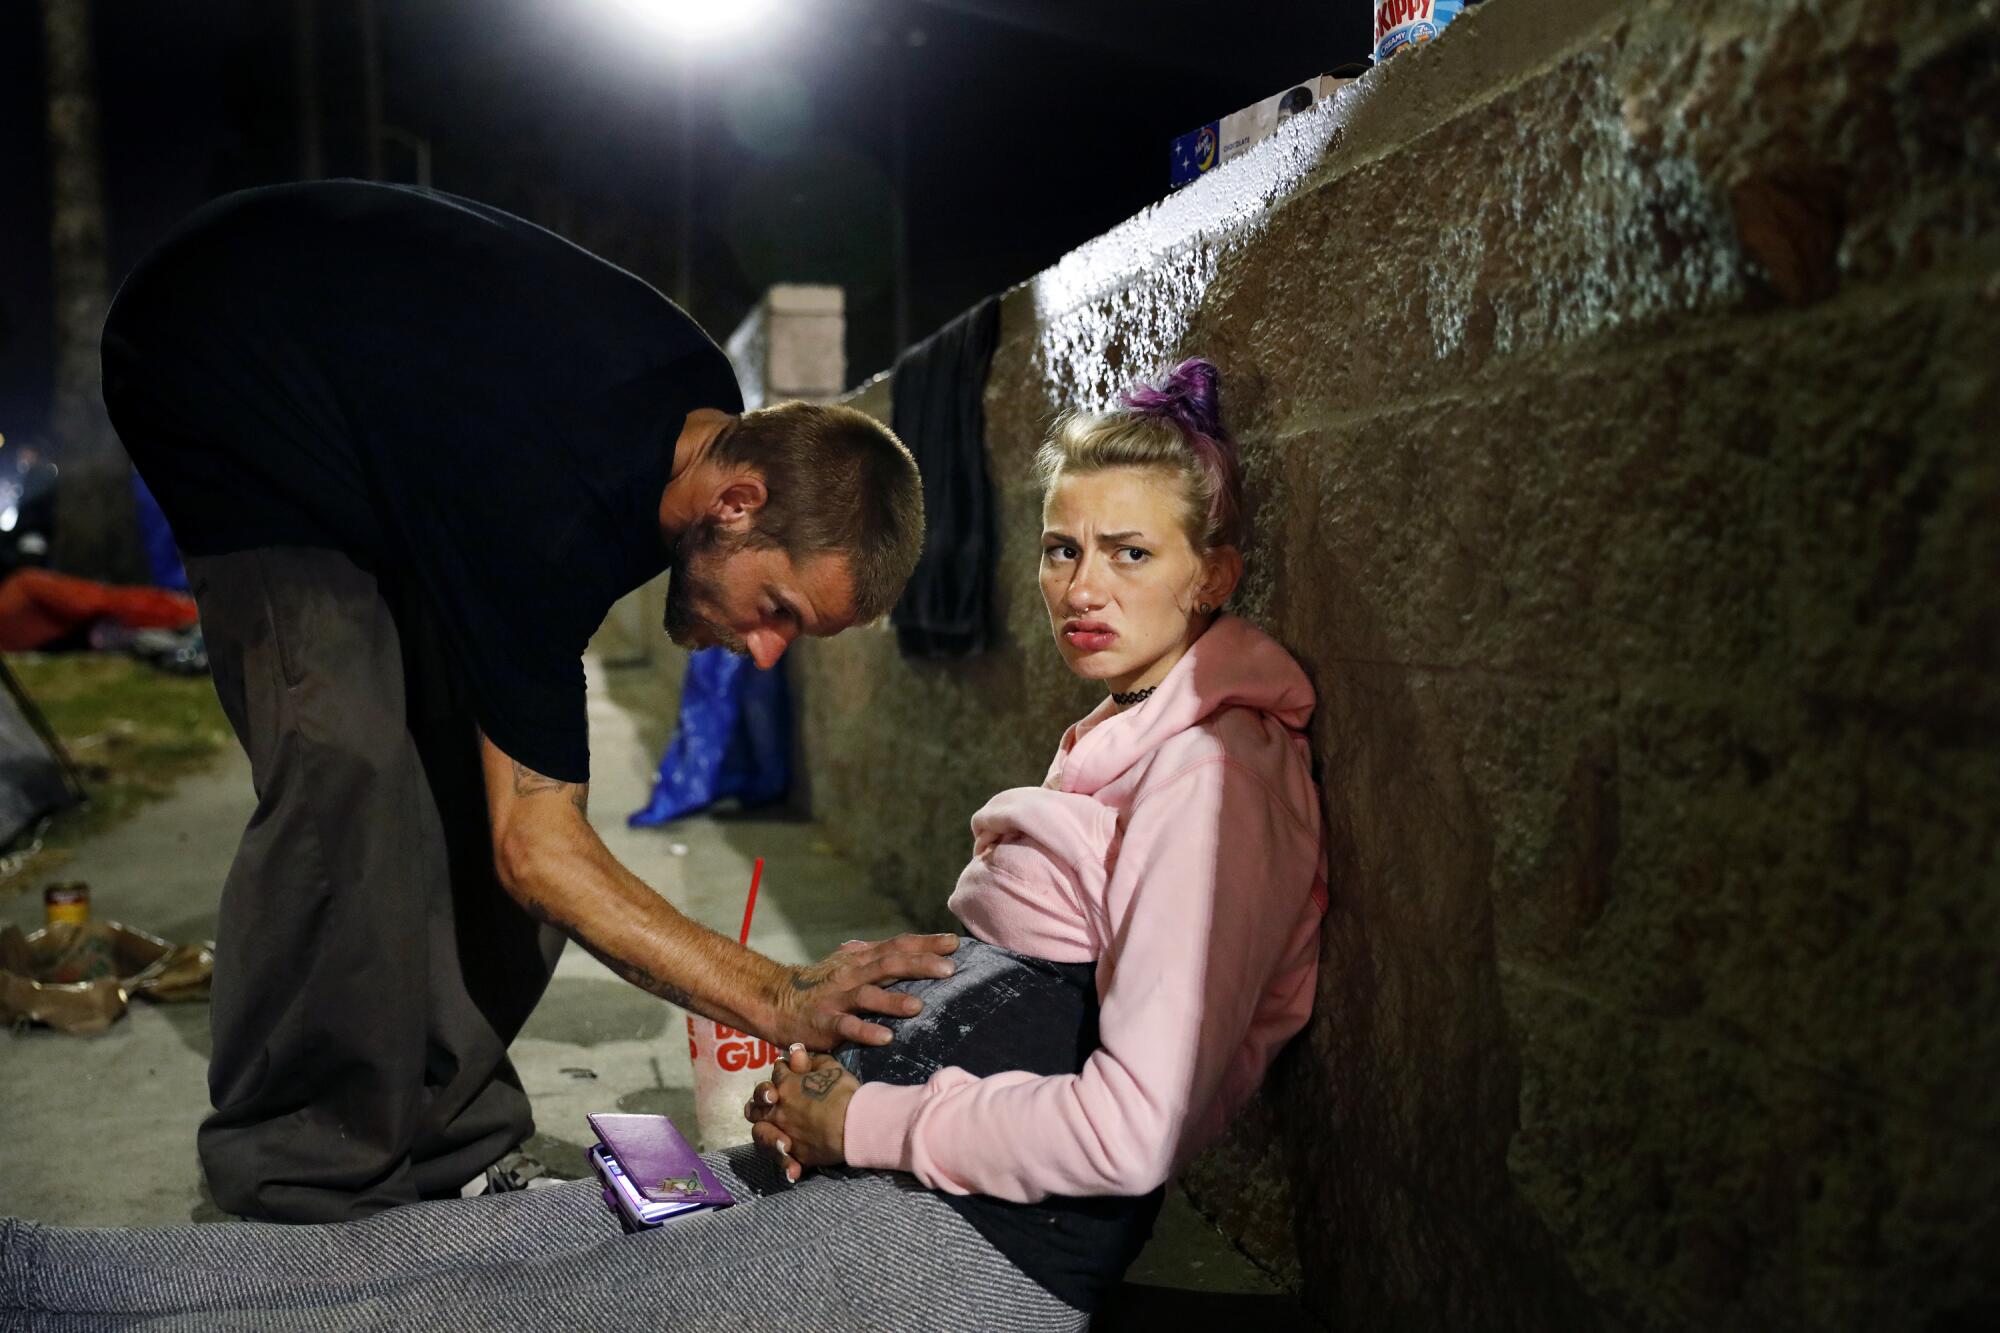 Mckenzie Trahan, 22, stares off as her boyfriend Eddie, 26, rests his hand on her stomach near their tent in Hollywood.